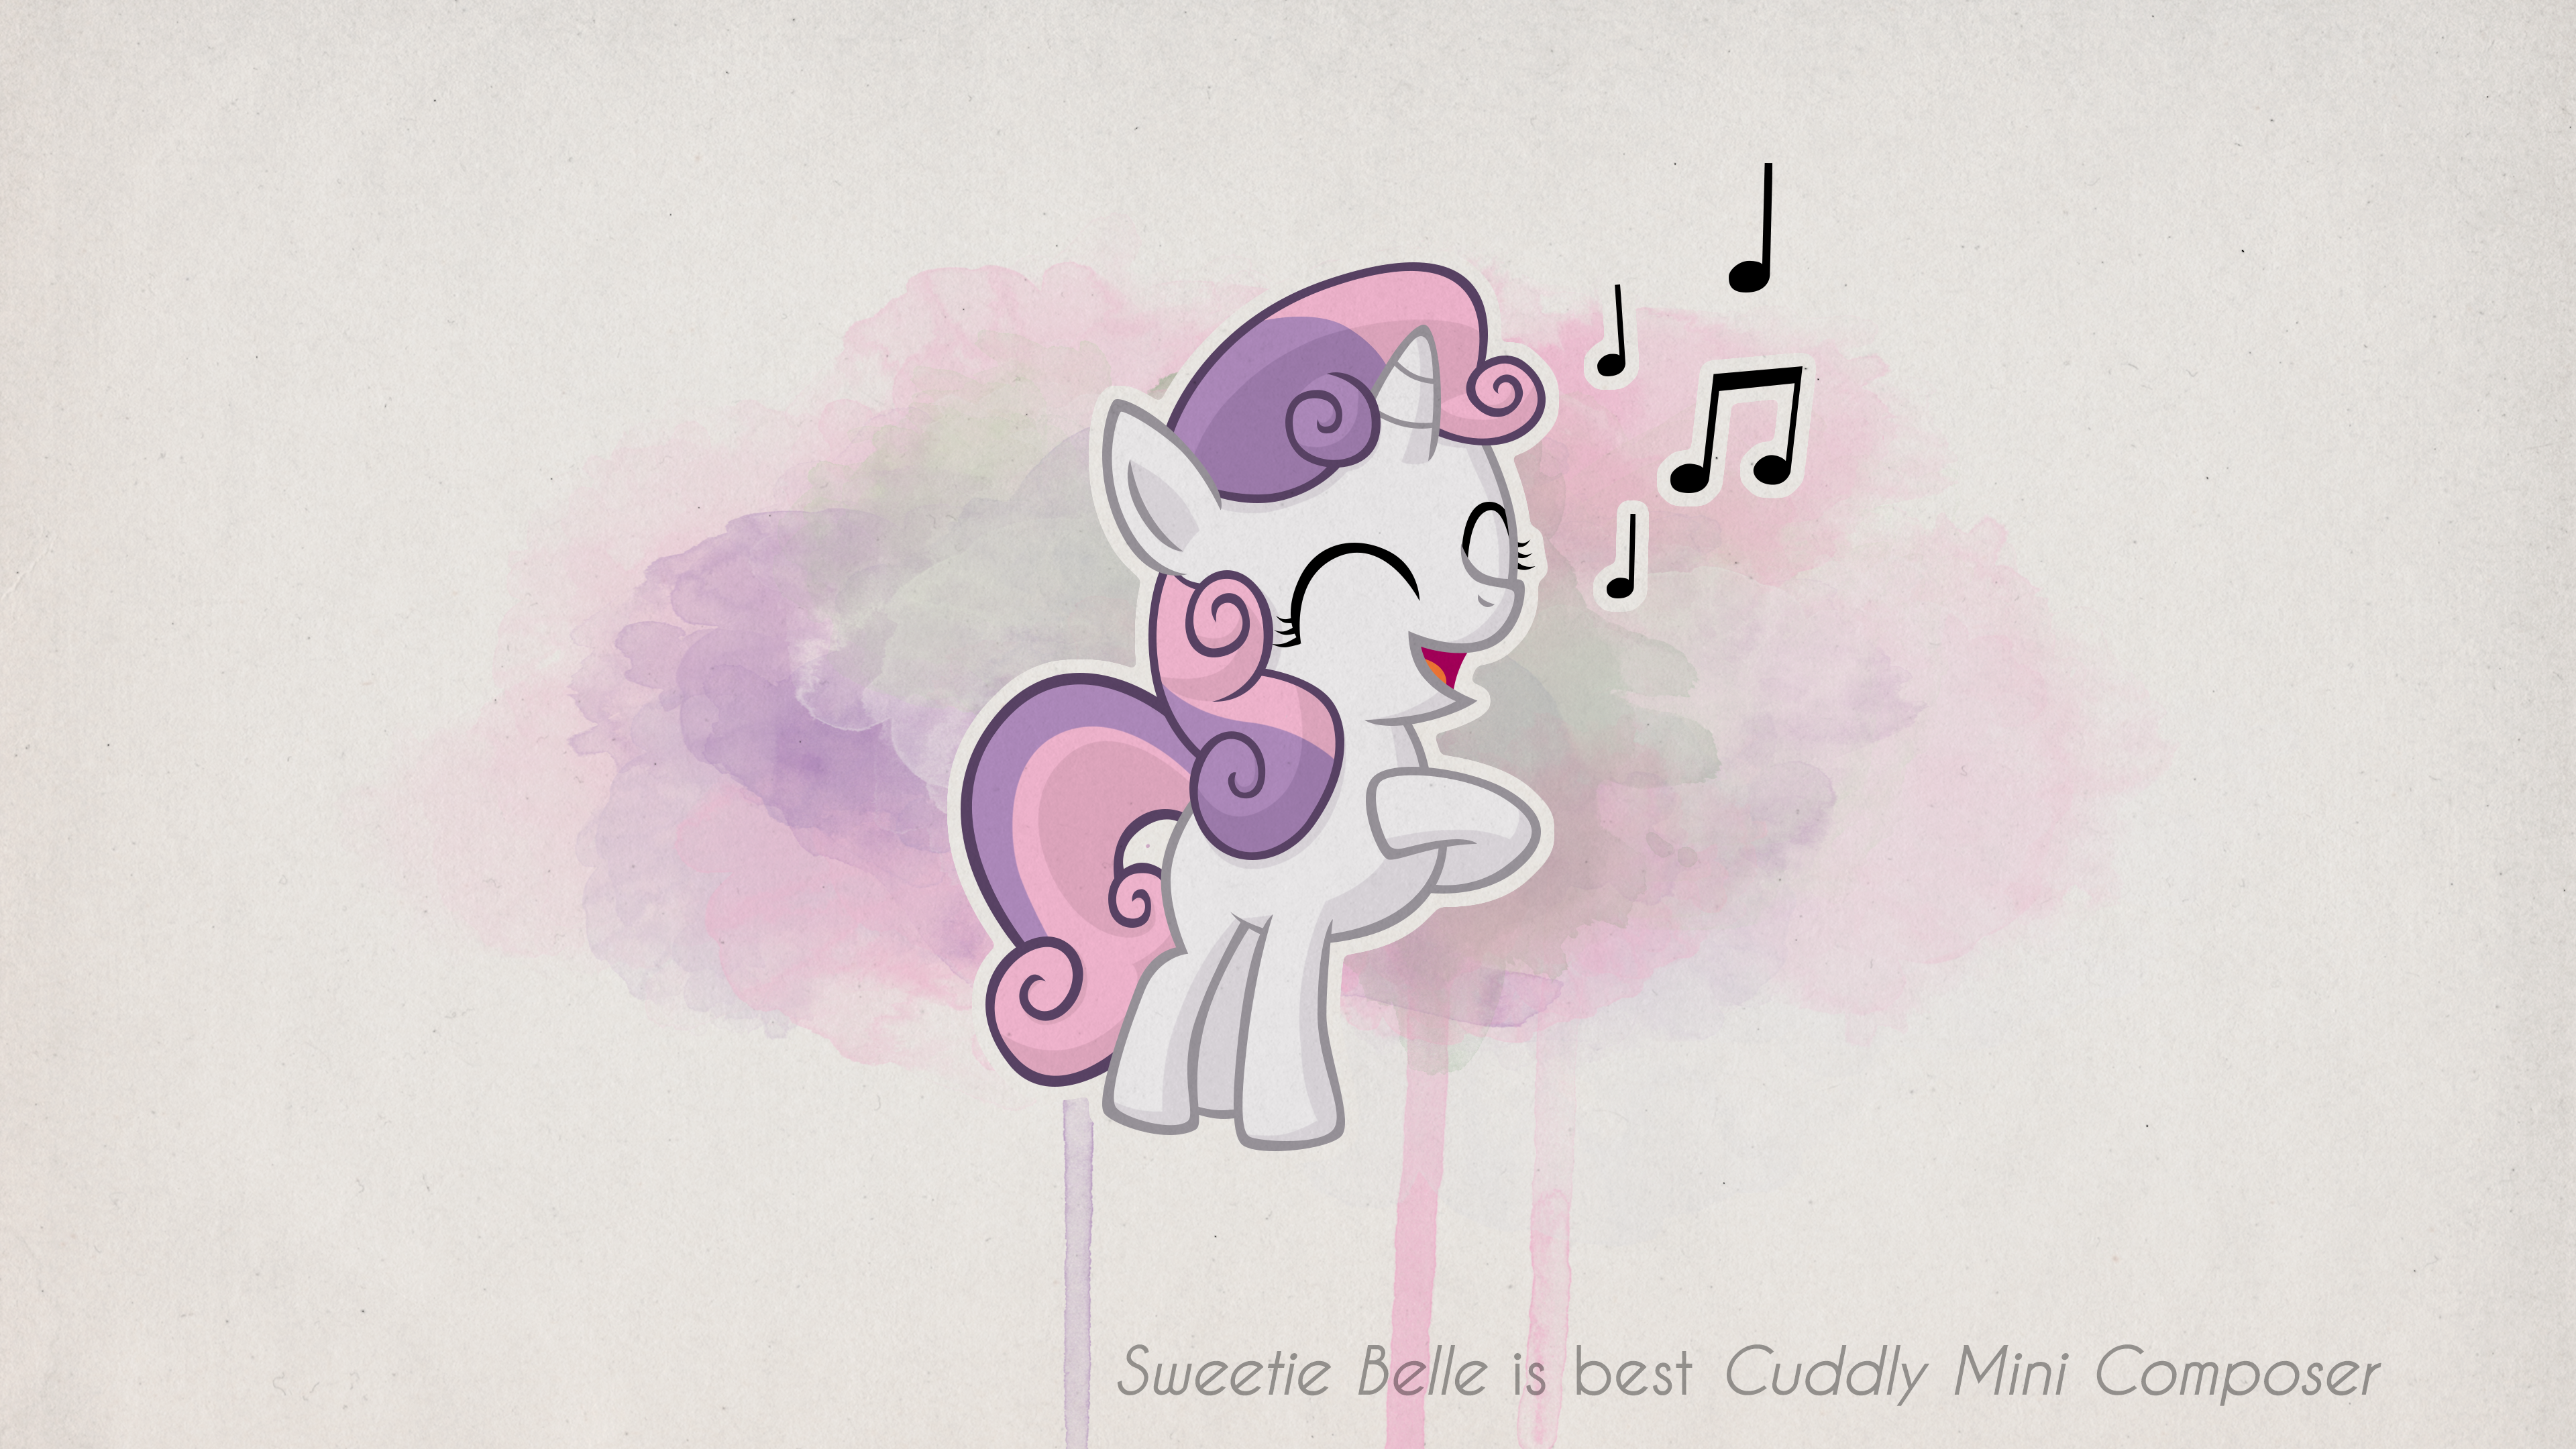 Sweetie Belle is best Cuddly Mini Composer by SterlingPony